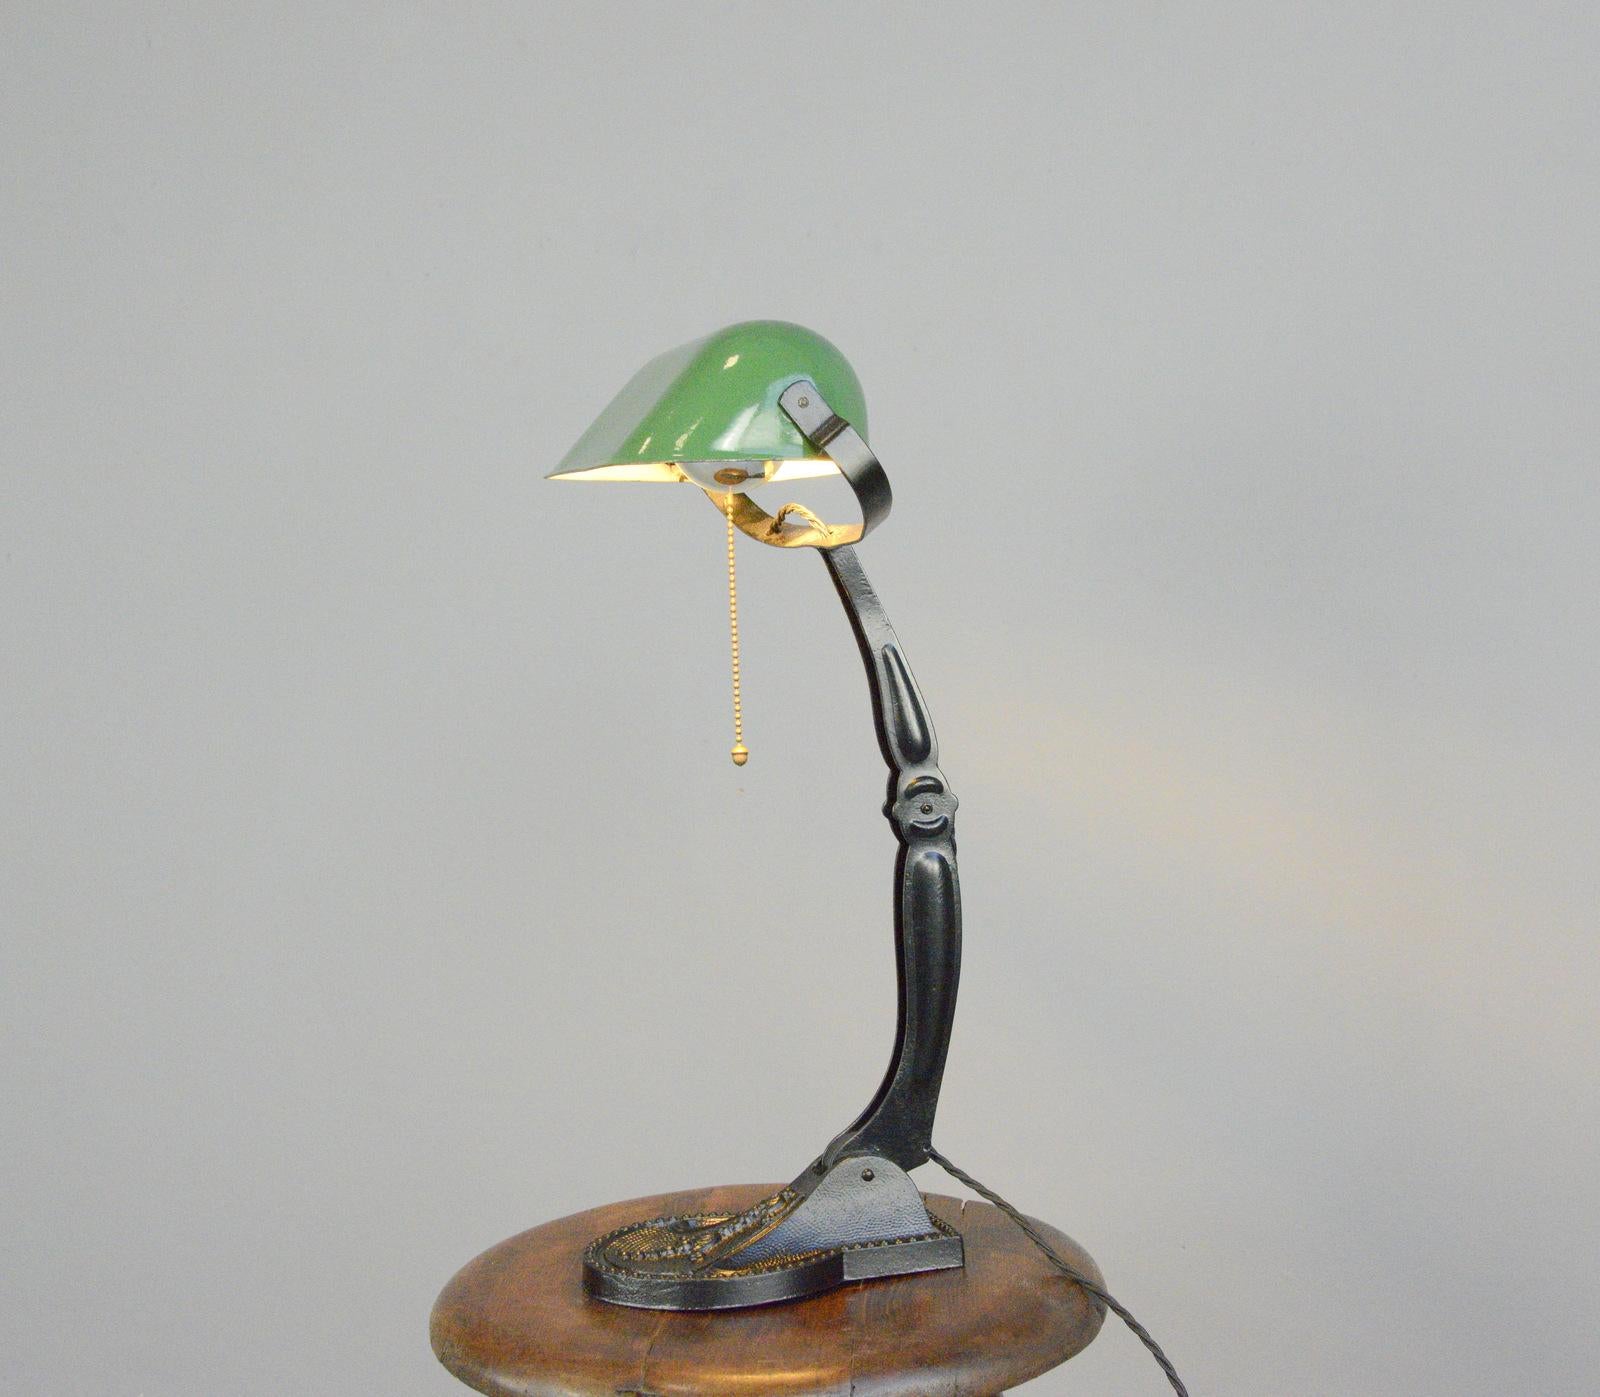 Ornate Hungarian bankers desk lamp, circa 1920s.

- Cast Iron base
- Vitreous green enamel shade
- Shade and arm are adjustable
- Takes E27 fitting bulbs
- On/Off switch on the bulb holder
- Hungarian, circa 1920s
- Measures: 46cm tall x